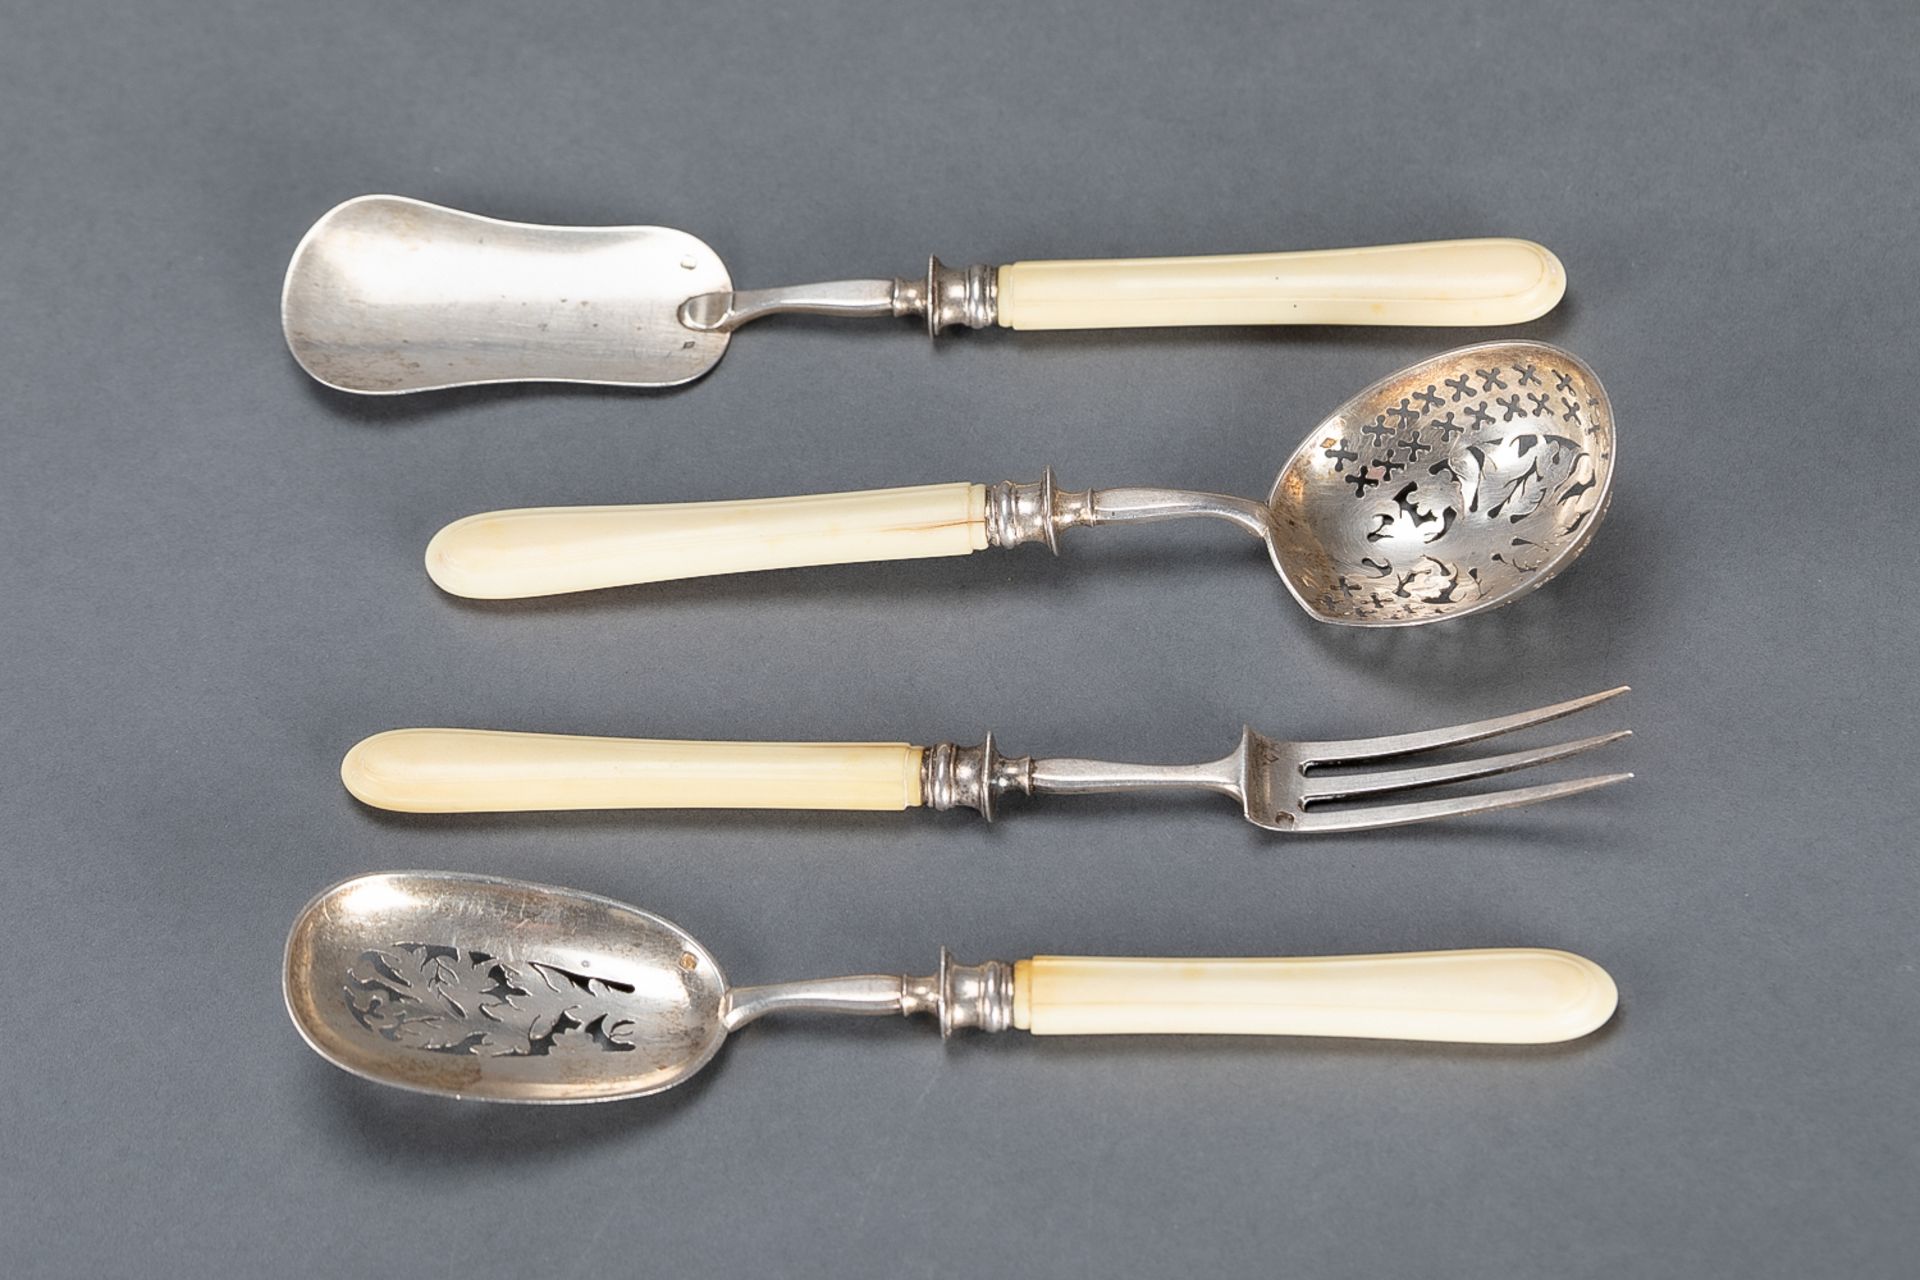 French side set comprising four items, silver, late 19th Century; with I. Grip;950/1000; weight